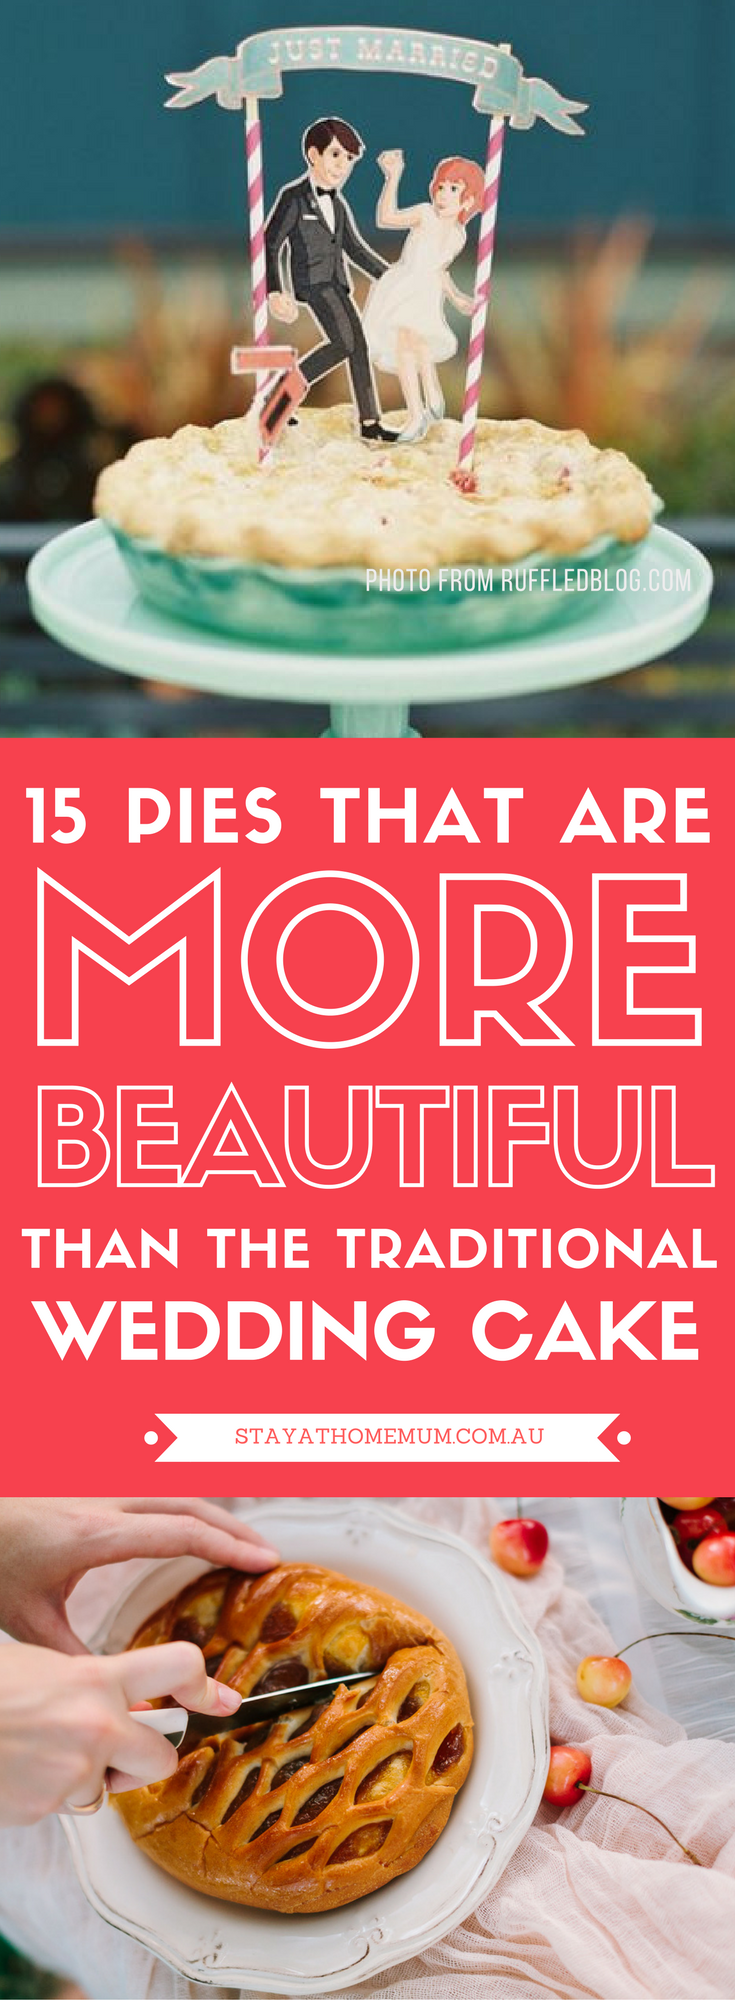 15 Pies That Are More Beautiful Than The Traditional Wedding Cake